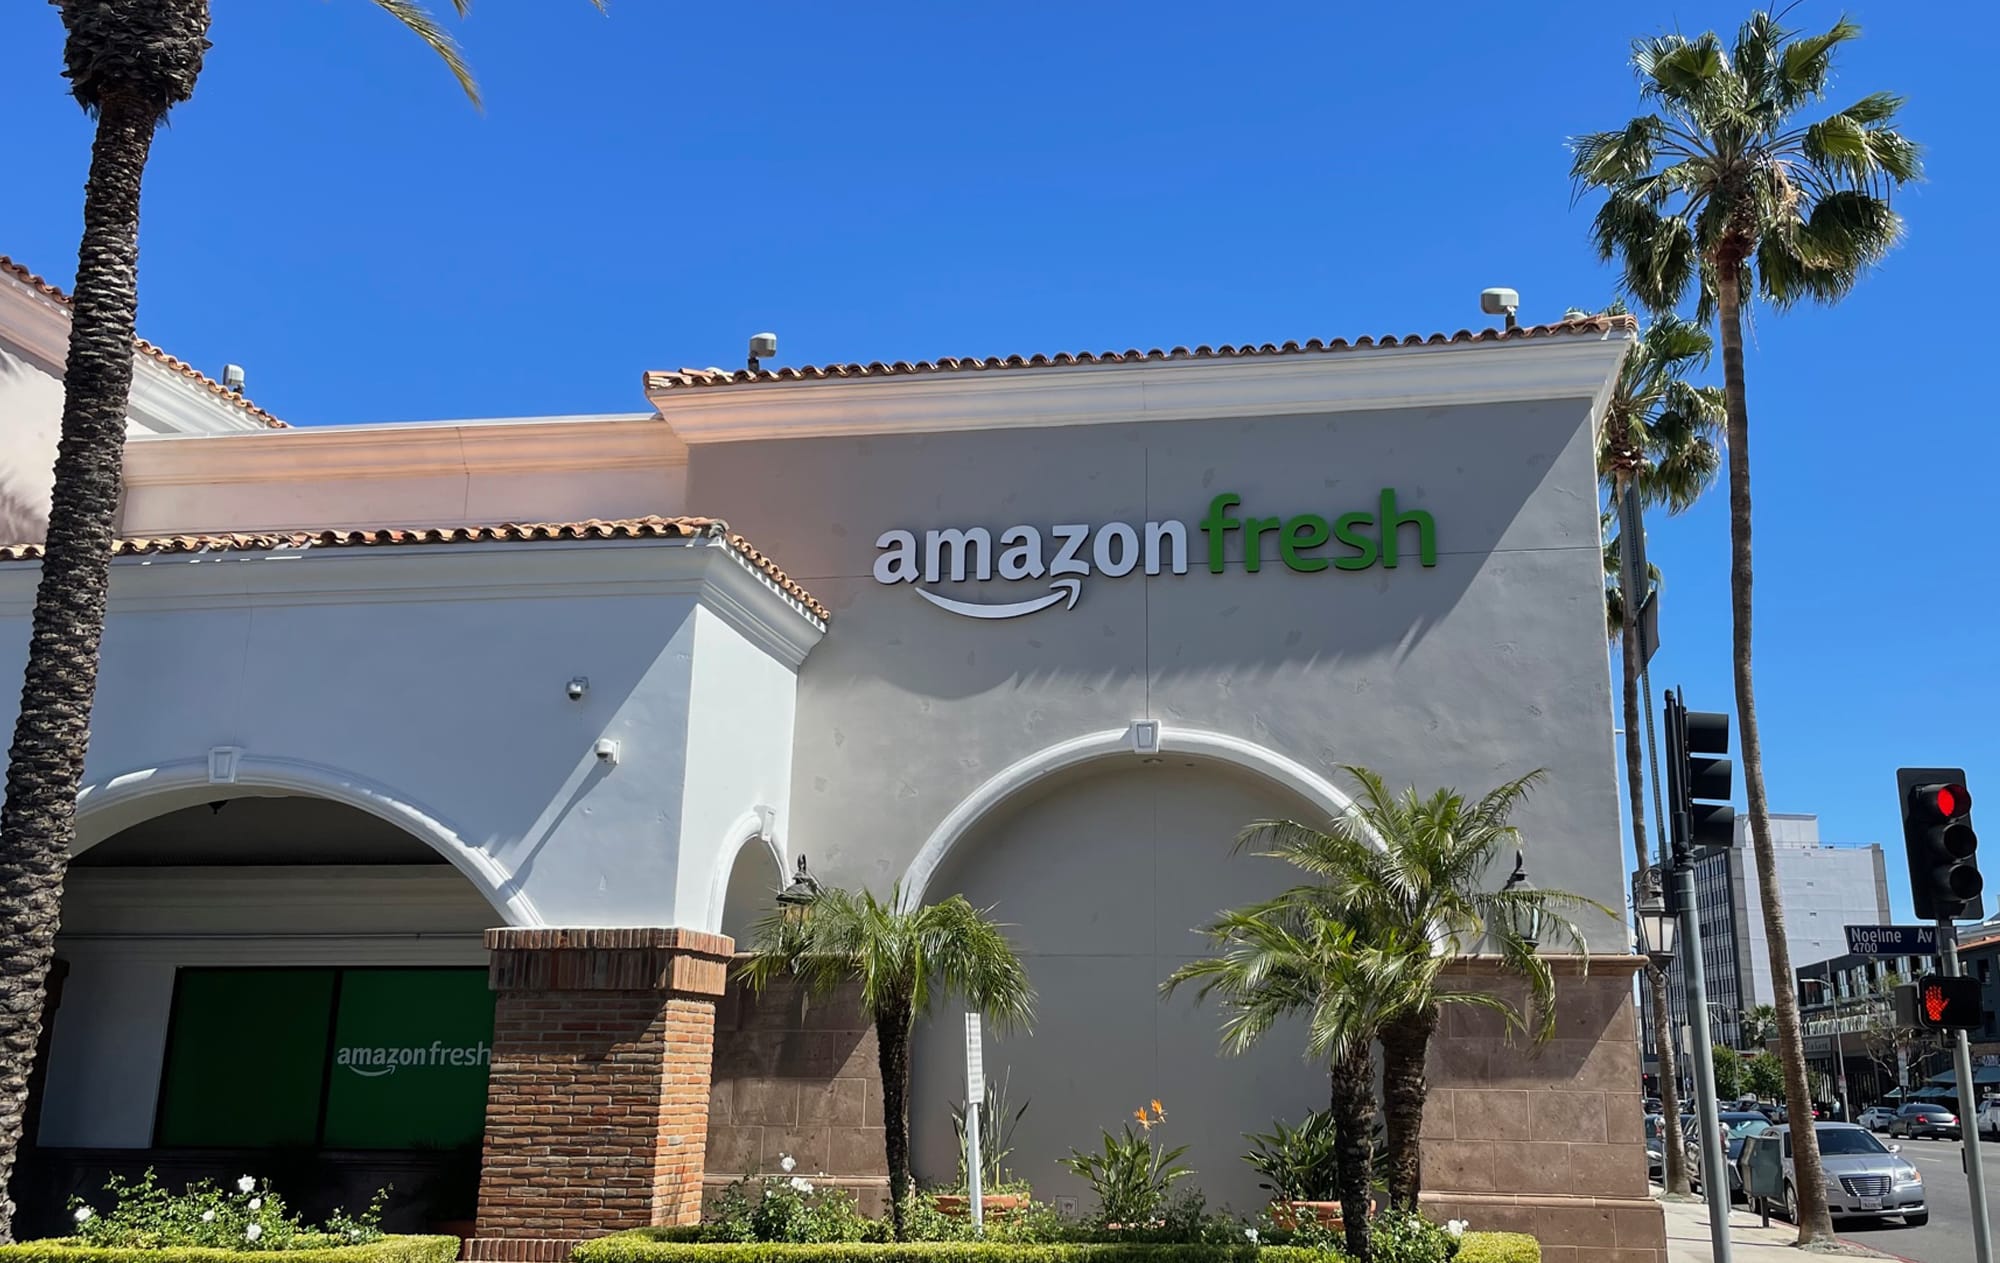 Ad Art Sign Co., AdArt, Full Service Signage, LED Lighting, Digital Signage,Retail, Face-Lit Channel Letters, Amazon Fresh, Encino, CA